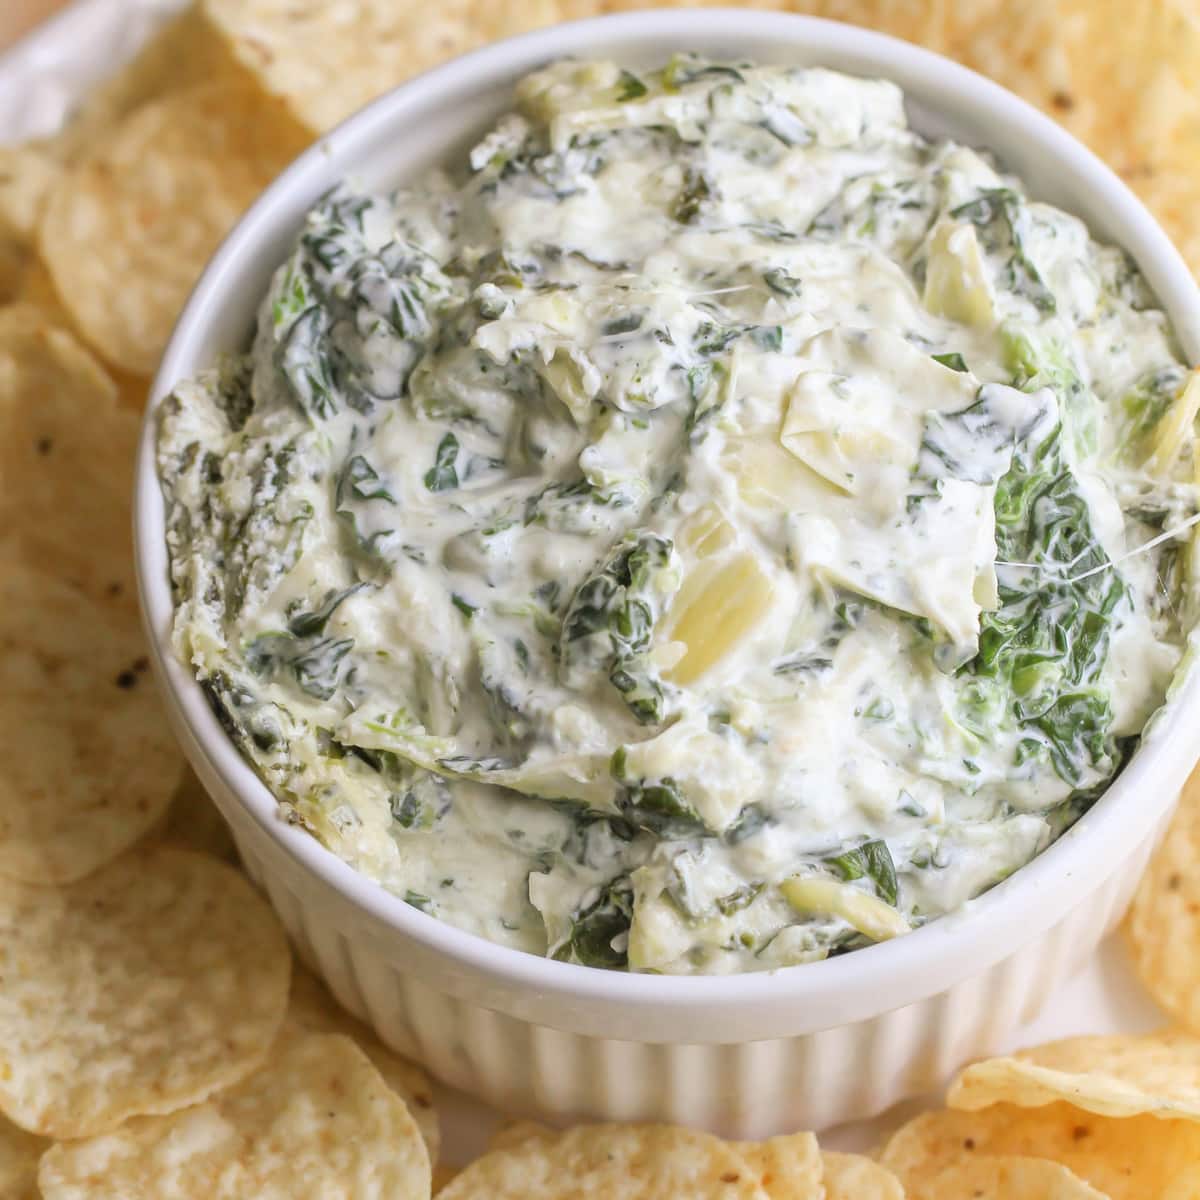 Spinach and Artichoke Dip - in bowl close up image